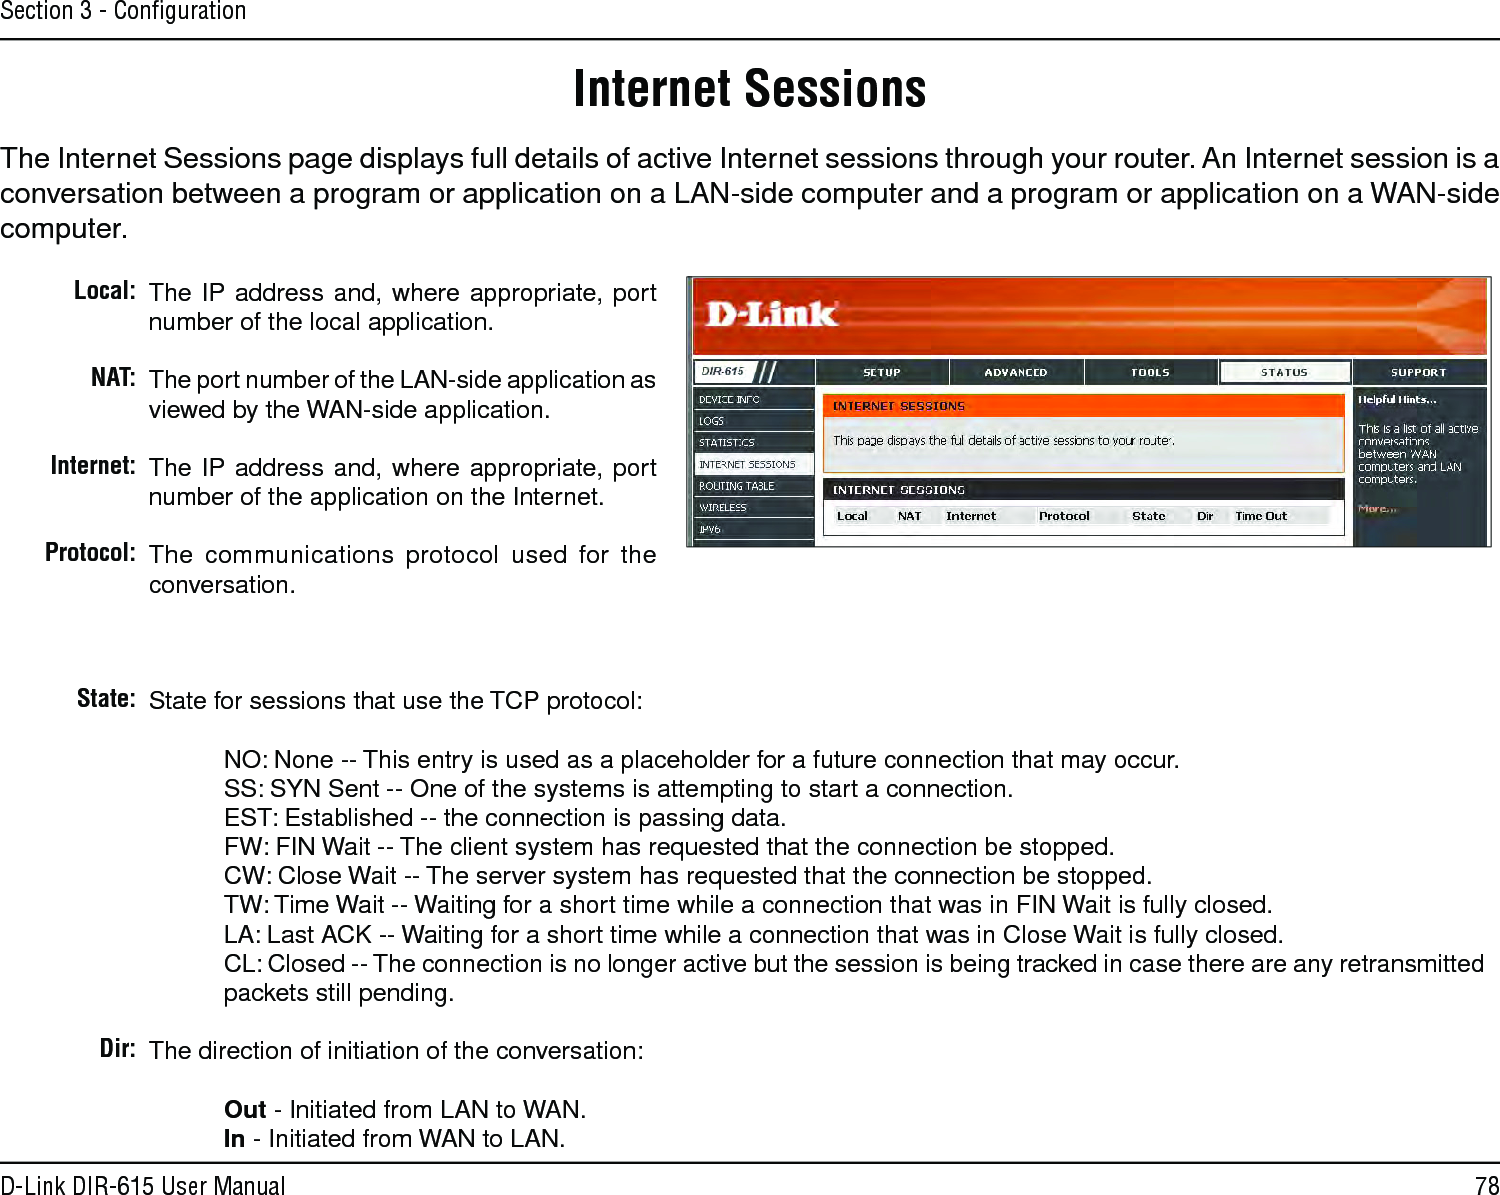 78D-Link DIR-615 User ManualSection 3 - ConﬁgurationInternet SessionsThe Internet Sessions page displays full details of active Internet sessions through your router. An Internet session is a conversation between a program or application on a LAN-side computer and a program or application on a WAN-side computer. Local:NAT:Internet:Protocol:State:Dir:The IP address and, where appropriate, port number of the local application. The port number of the LAN-side application as viewed by the WAN-side application. The IP address and, where appropriate, port number of the application on the Internet. The communications protocol  used  for the conversation. State for sessions that use the TCP protocol:  NO: None -- This entry is used as a placeholder for a future connection that may occur.  SS: SYN Sent -- One of the systems is attempting to start a connection.  EST: Established -- the connection is passing data.  FW: FIN Wait -- The client system has requested that the connection be stopped.  CW: Close Wait -- The server system has requested that the connection be stopped.  TW: Time Wait -- Waiting for a short time while a connection that was in FIN Wait is fully closed.  LA: Last ACK -- Waiting for a short time while a connection that was in Close Wait is fully closed. CL: Closed -- The connection is no longer active but the session is being tracked in case there are any retransmitted packets still pending.The direction of initiation of the conversation:   Out - Initiated from LAN to WAN.  In - Initiated from WAN to LAN.